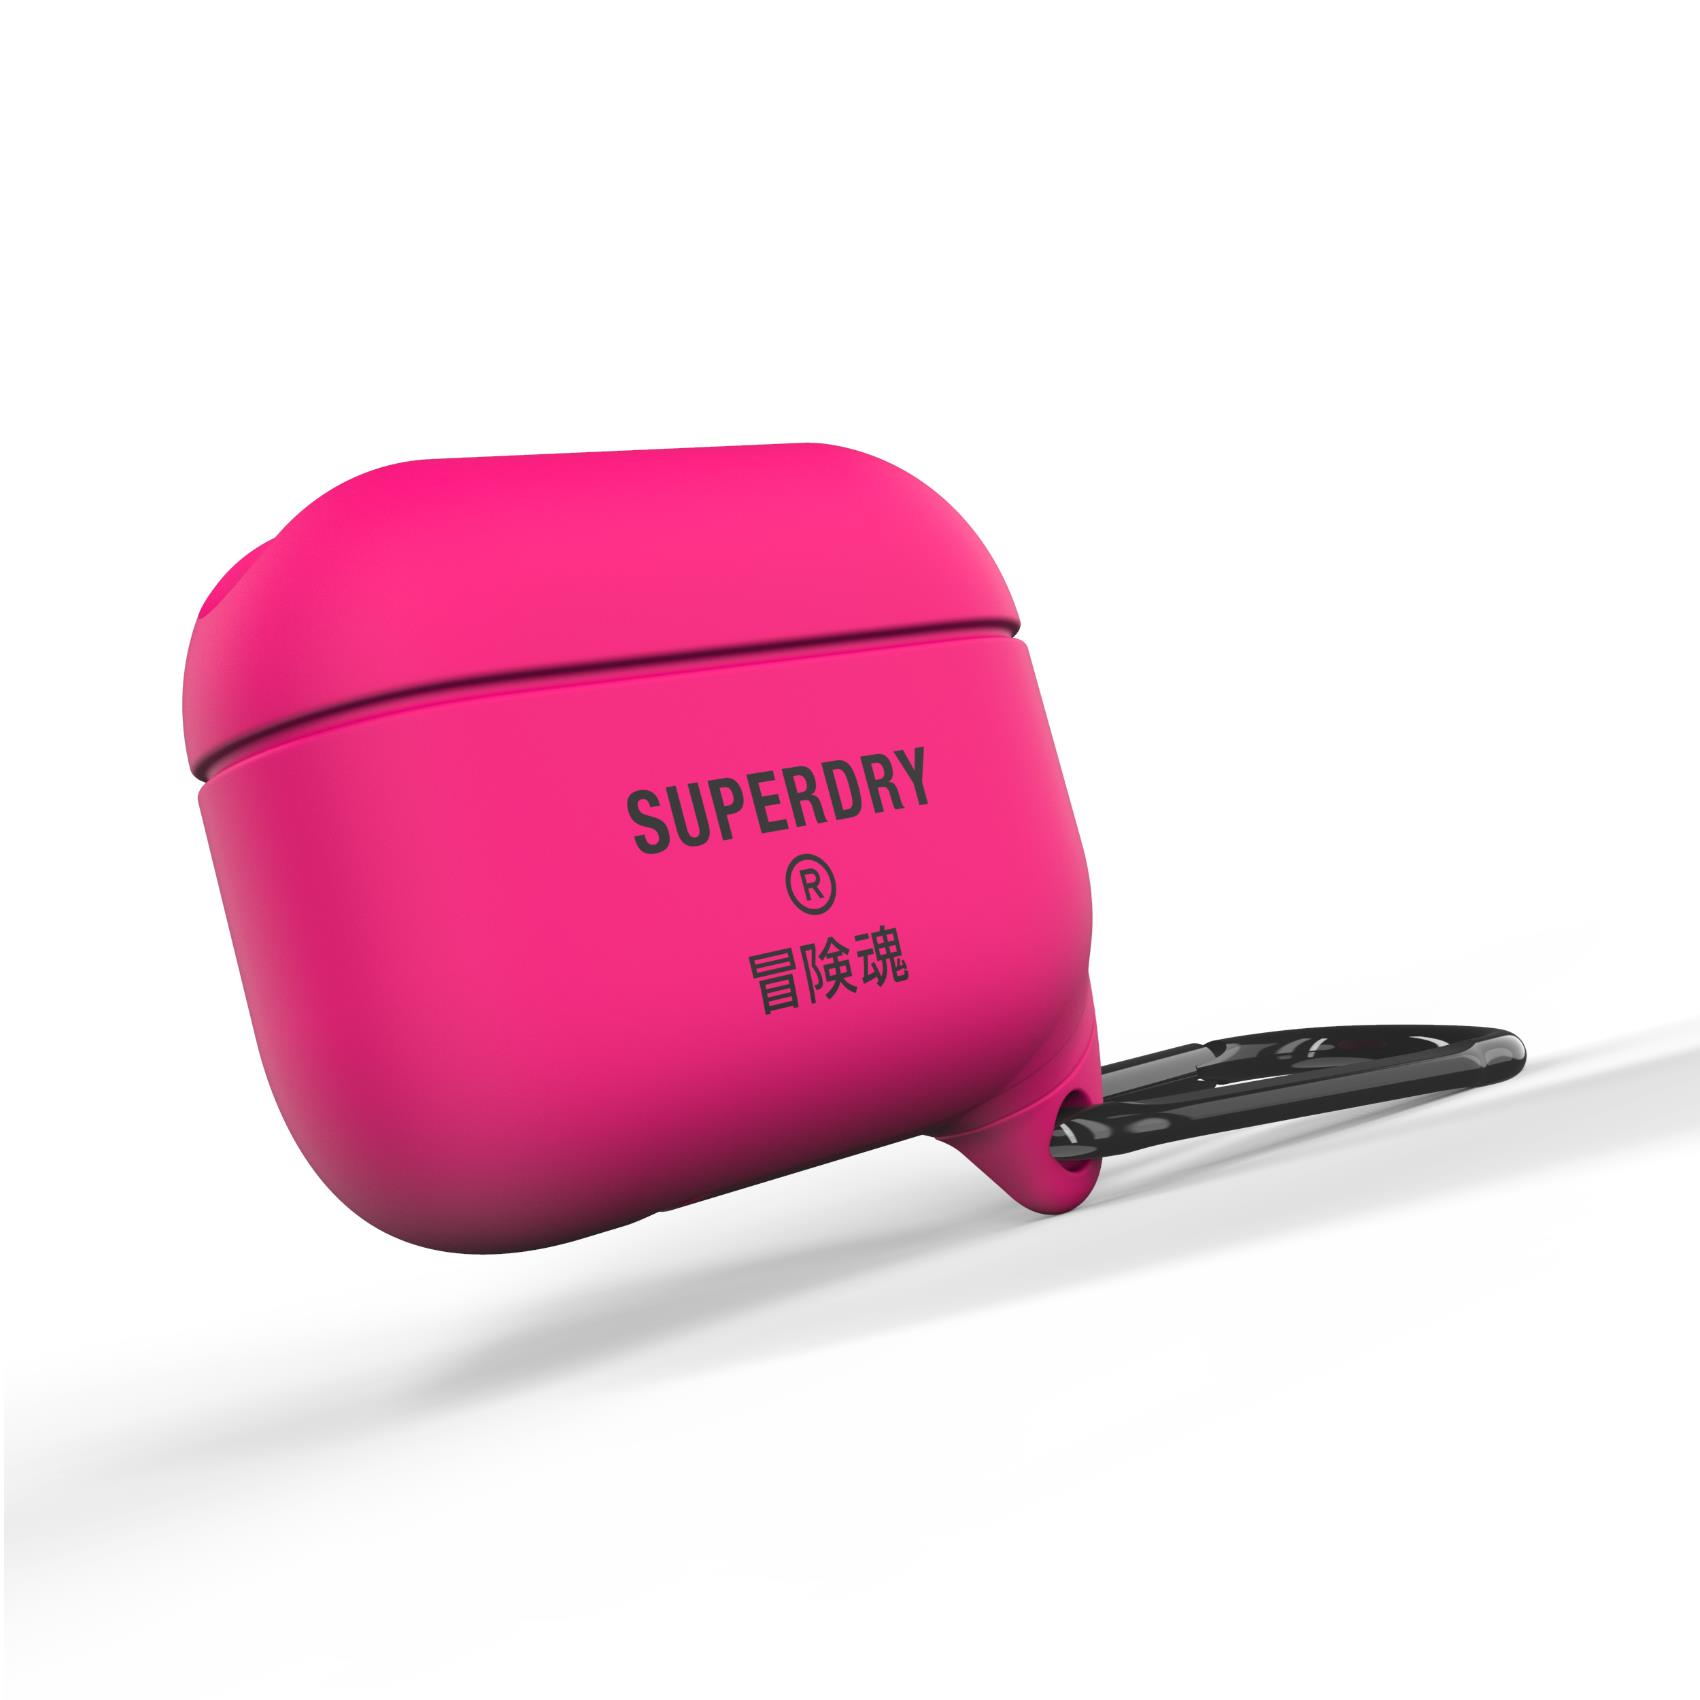 SUPERDRY AIRPOD PRO CASE PINK